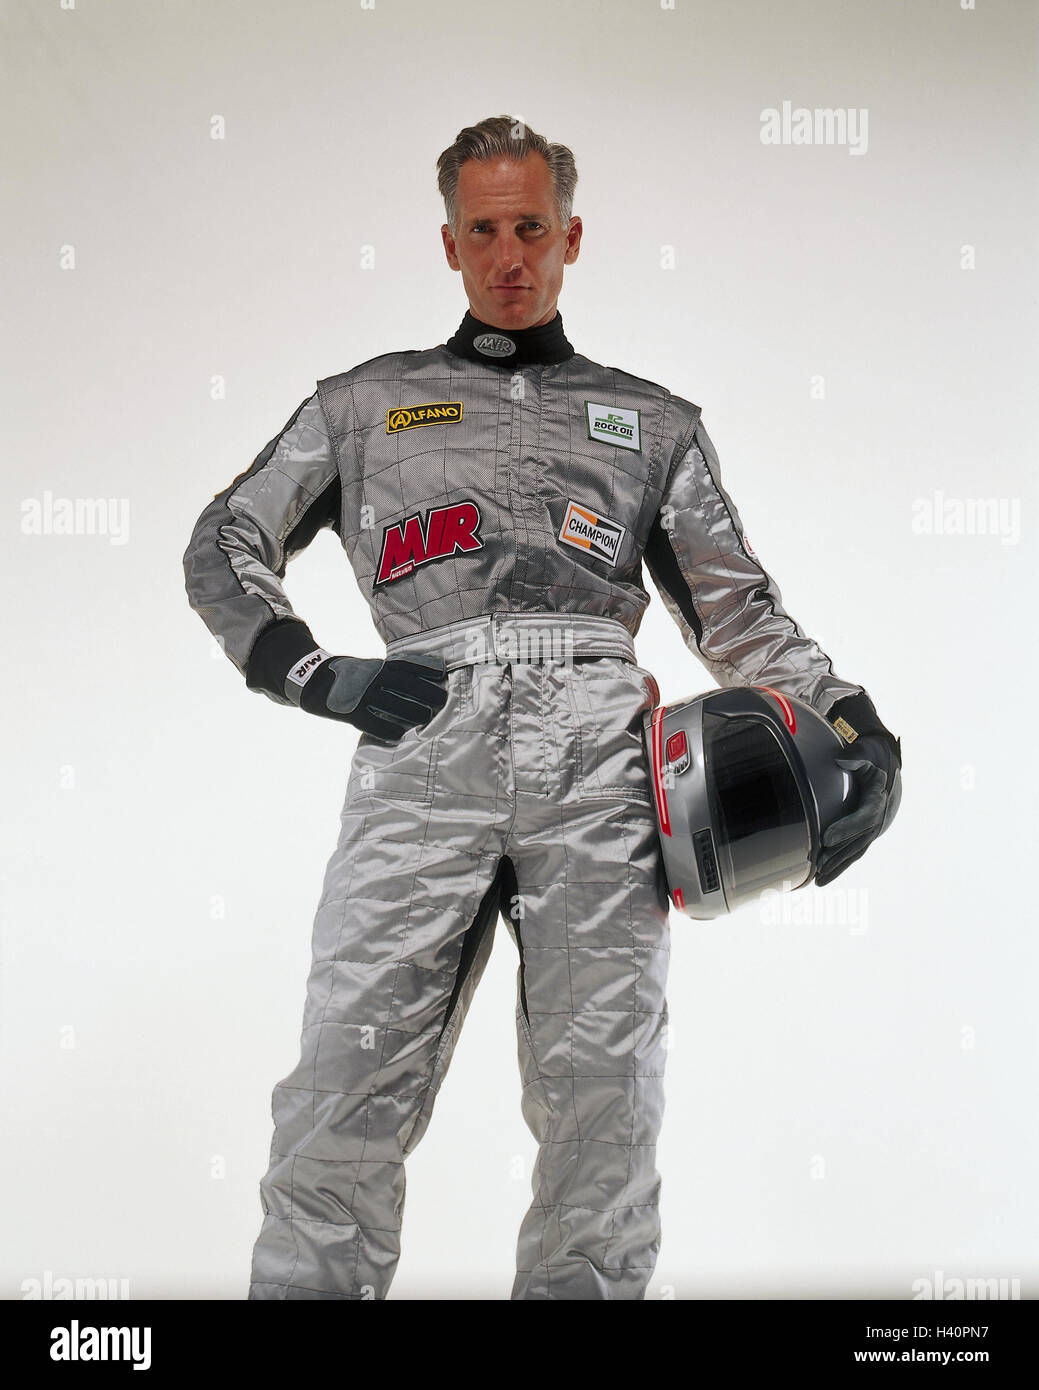 Motor sport, racing driver, overall, helmet, silver sport, racing sport, man, racing suit, crash helmet, safety helmet, hard hat, gloves, stand, careless, casually, cool, studio, Stock Photo